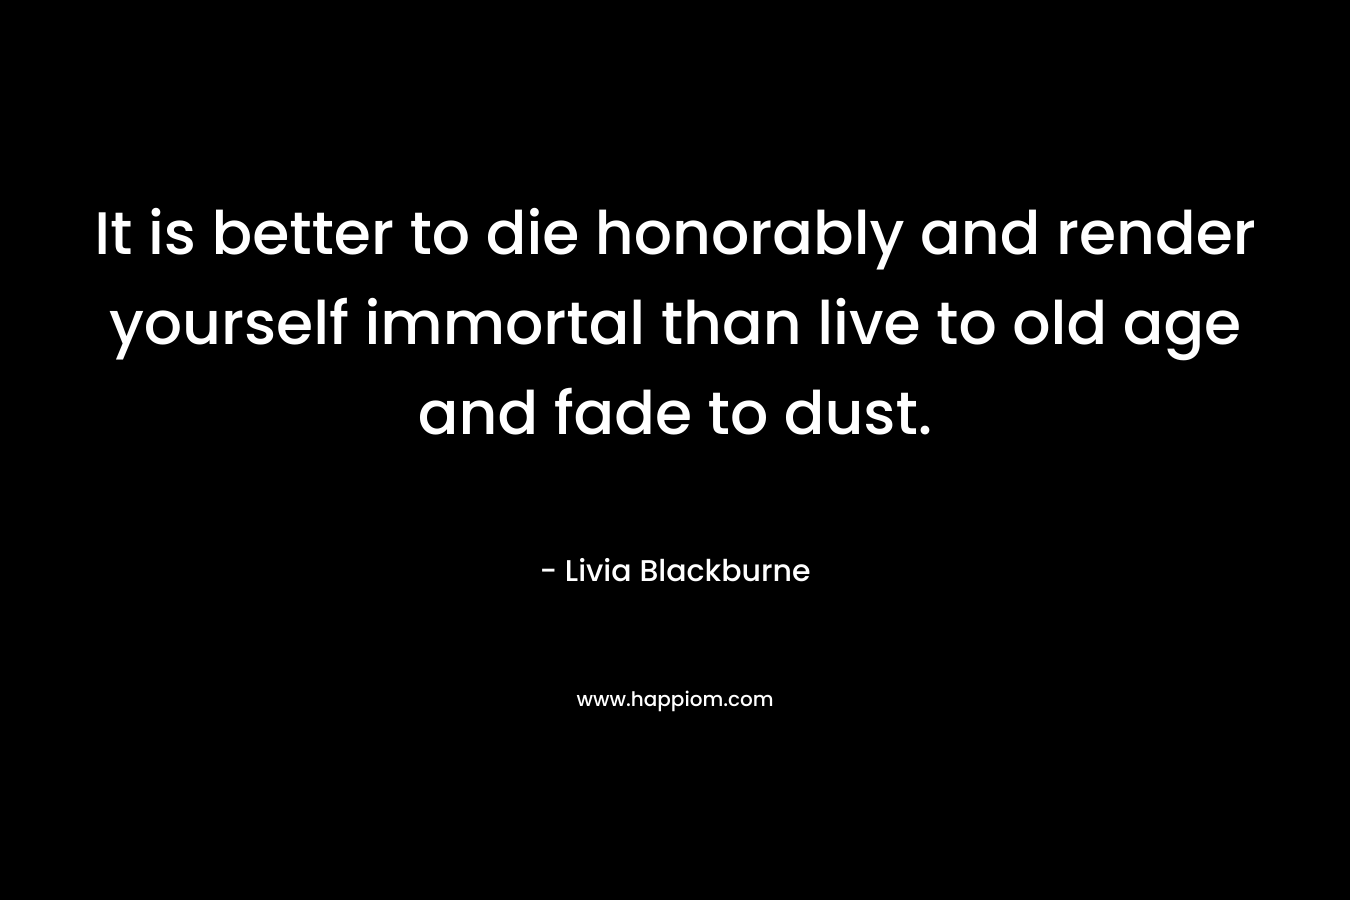 It is better to die honorably and render yourself immortal than live to old age and fade to dust. – Livia Blackburne